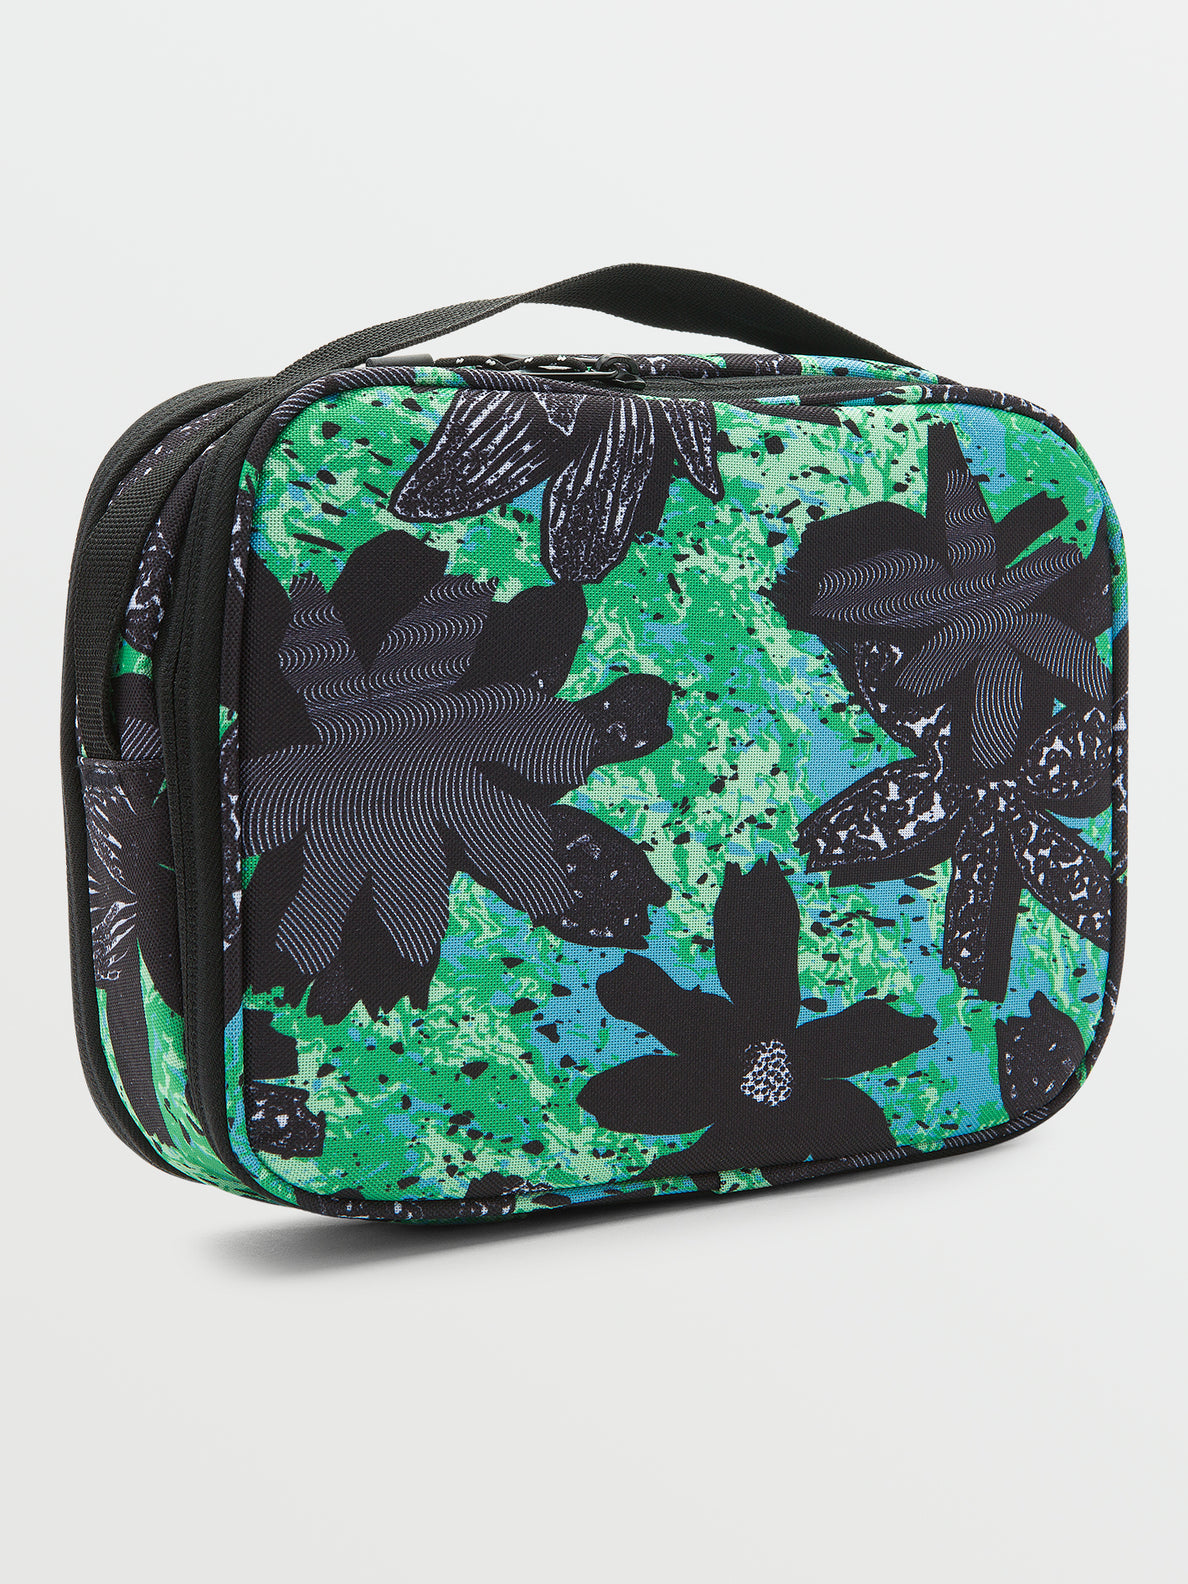 Youth Sid Licious Lunchkit - Teal